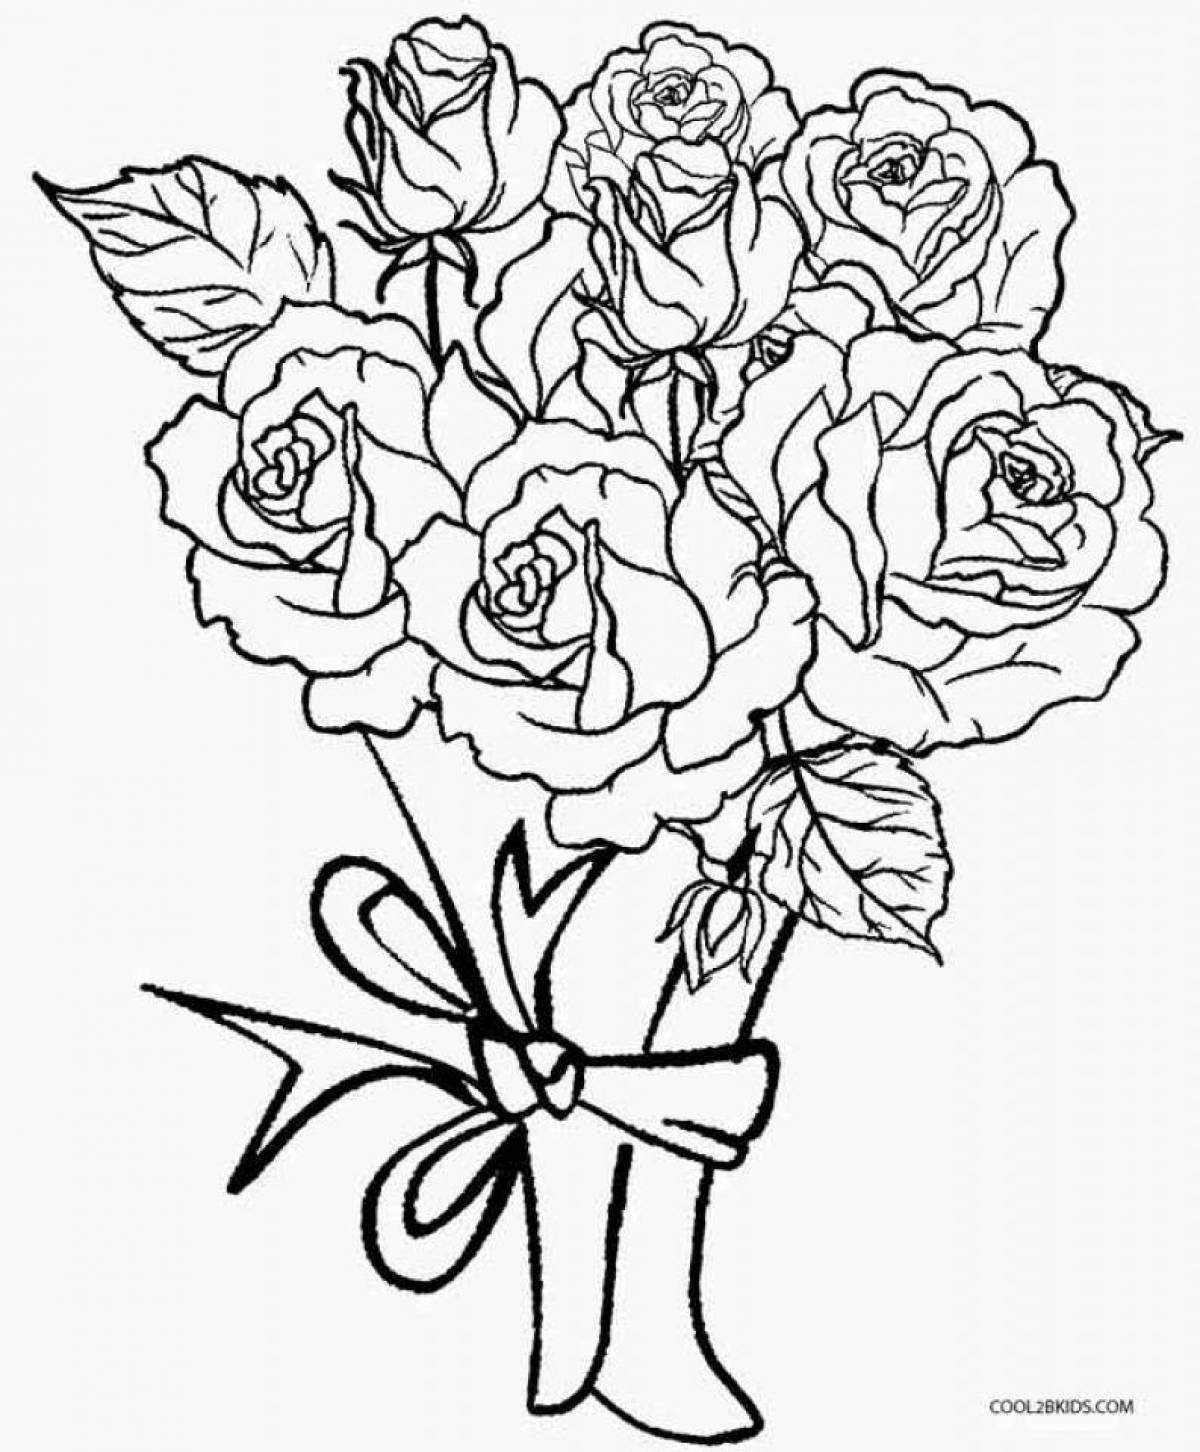 Blissful bouquet of roses coloring page